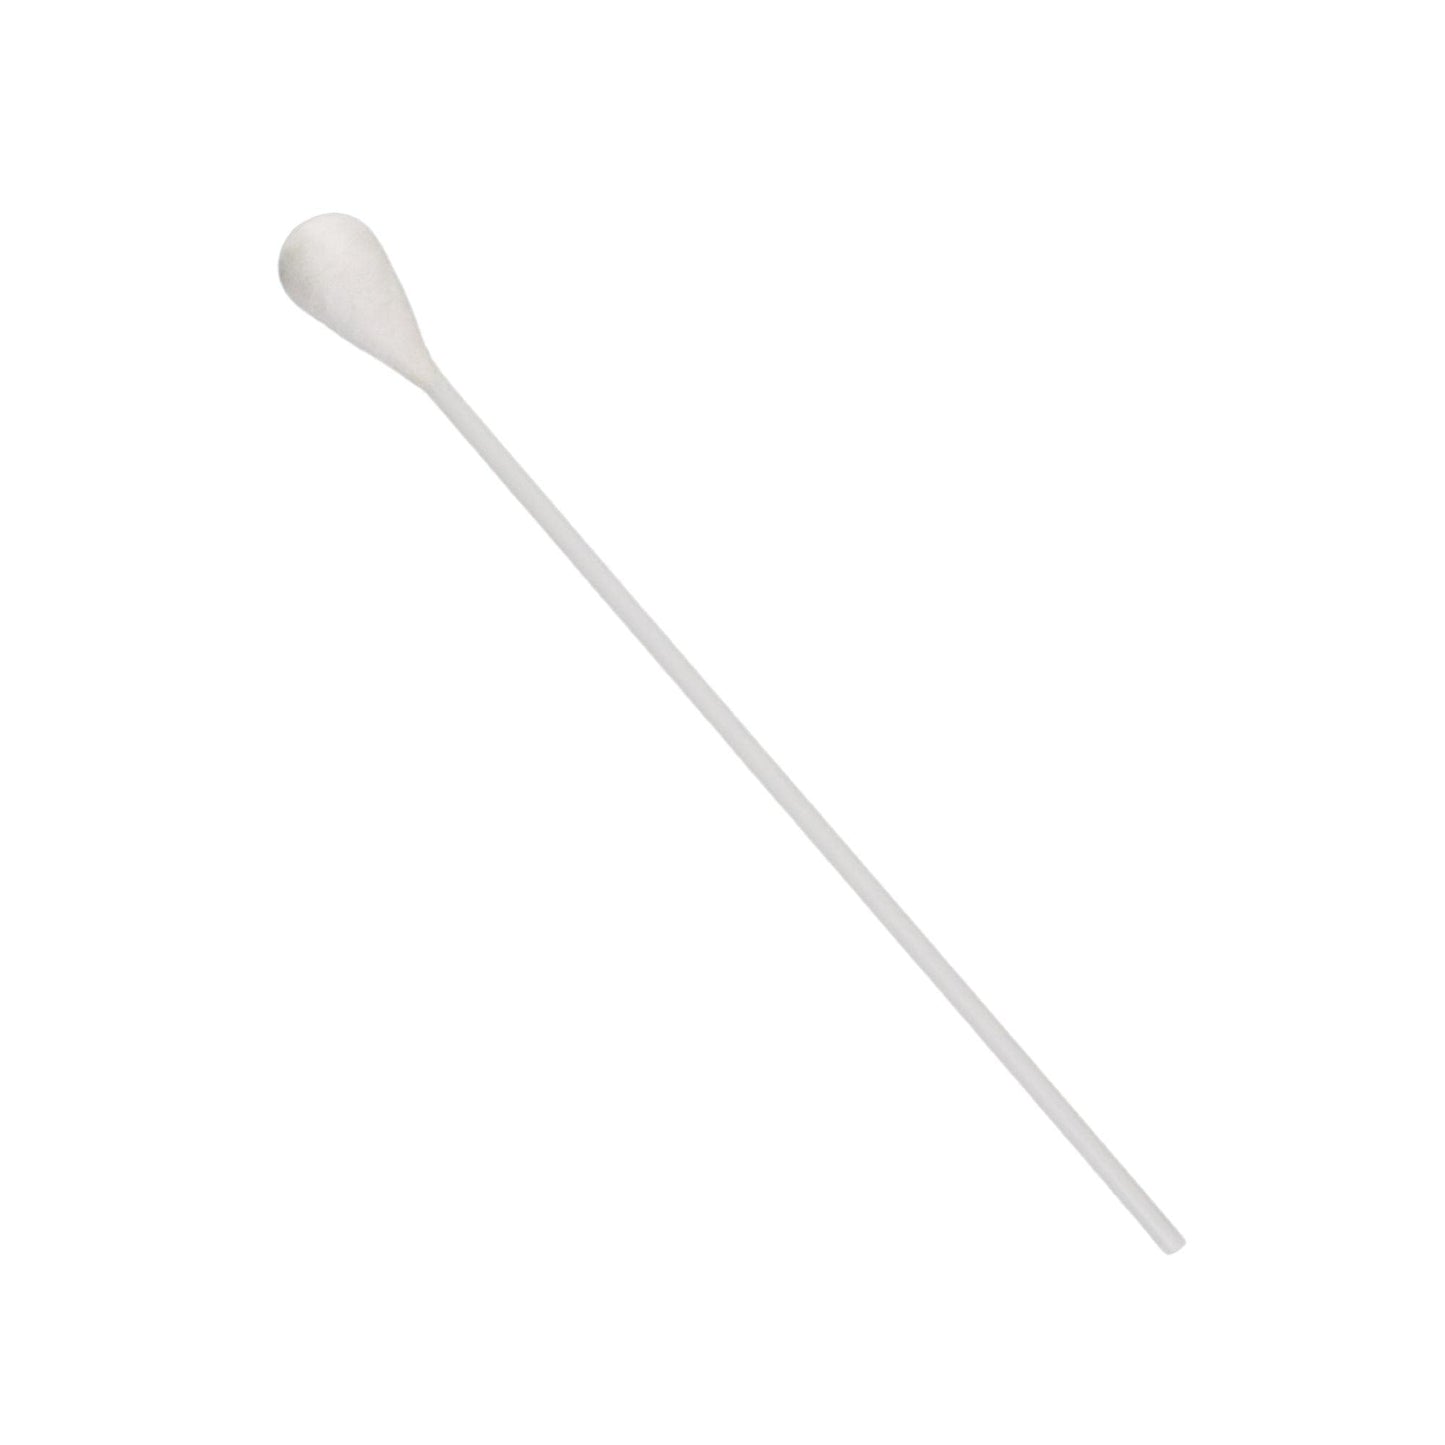 Oversized Swabs [Pack of 100] Extra-long 8" Cotton Tipped Applicators with Large 1/2" Diameter Swab - Non-sterile – Plastic Shaft